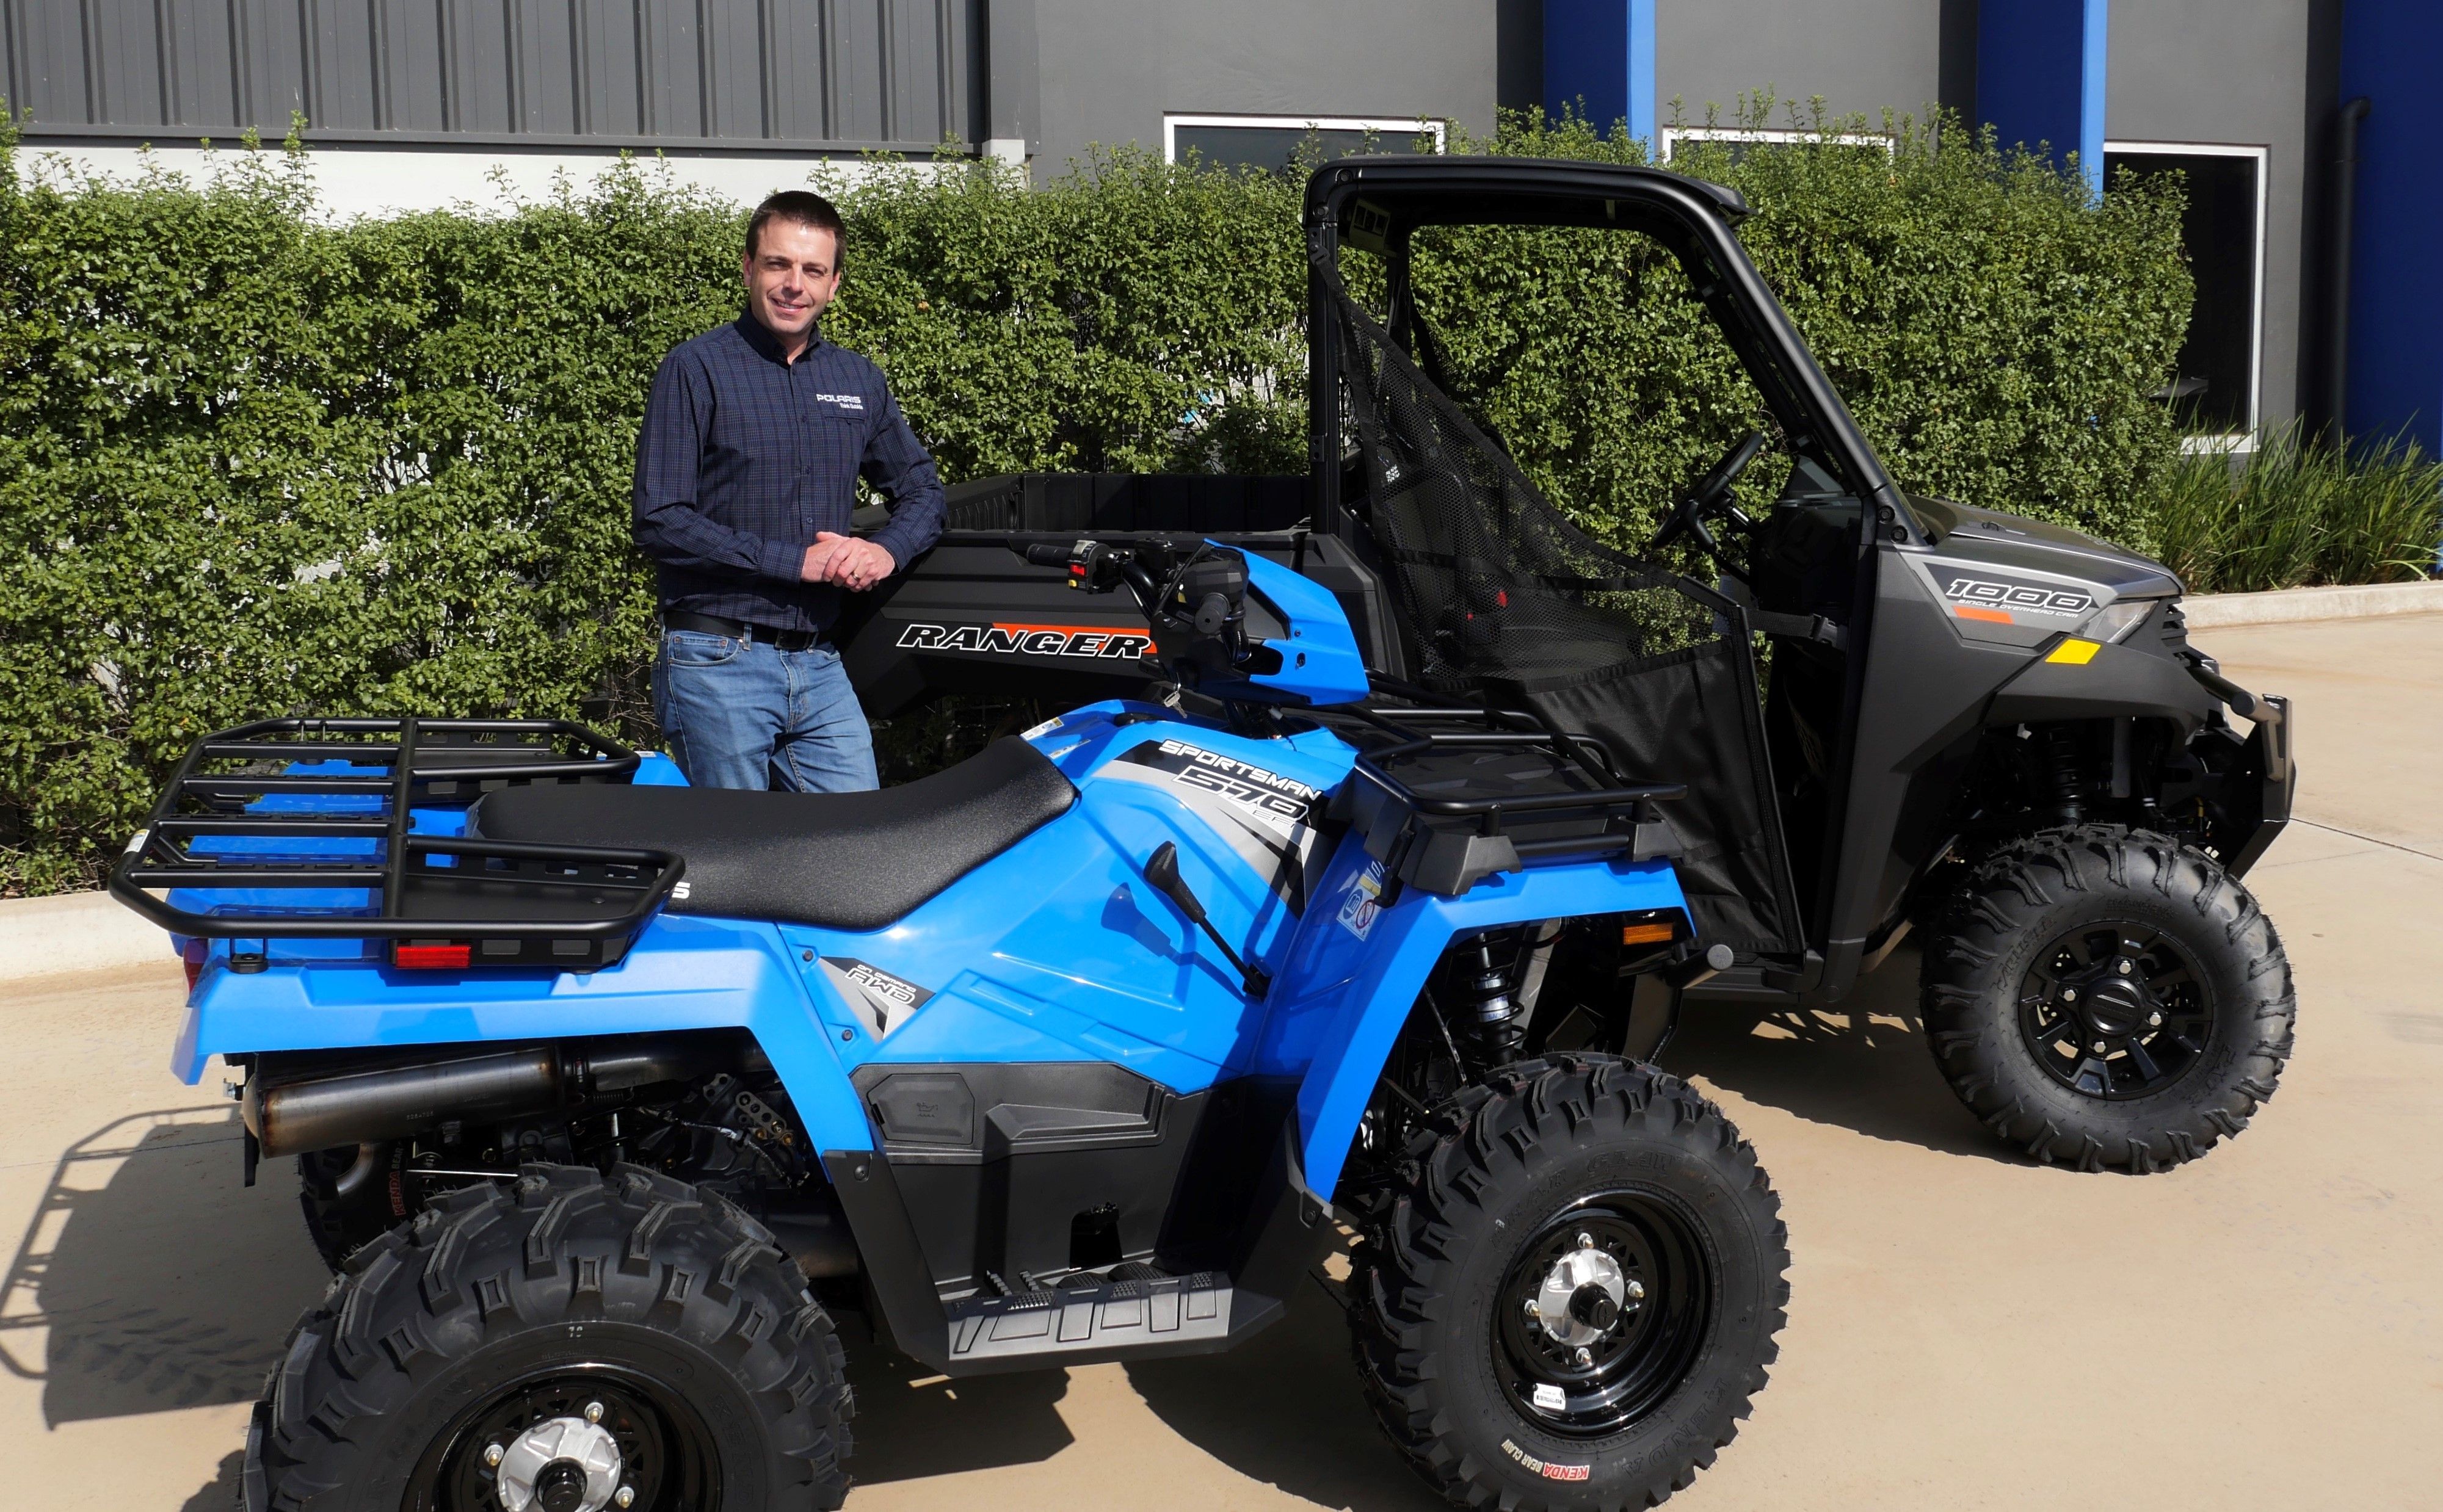 Why the Polaris side-by-side is about to become a farmer's new best friend